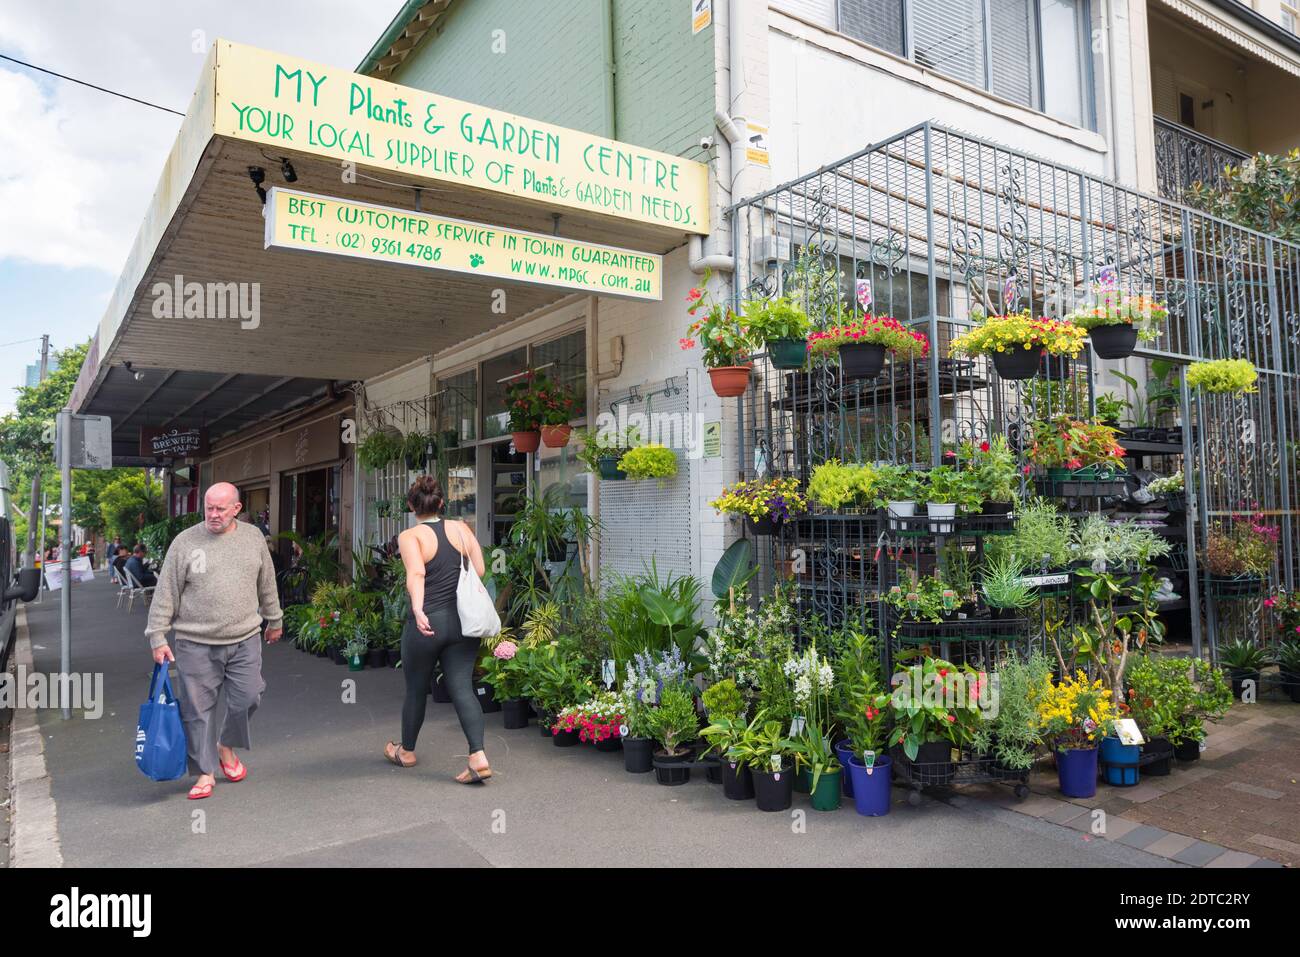 Pelargoniums or Geraniums and other flowering plants in small pots on racks outside an inner city plant store in Darlinghurst, Sydney, Australia Stock Photo